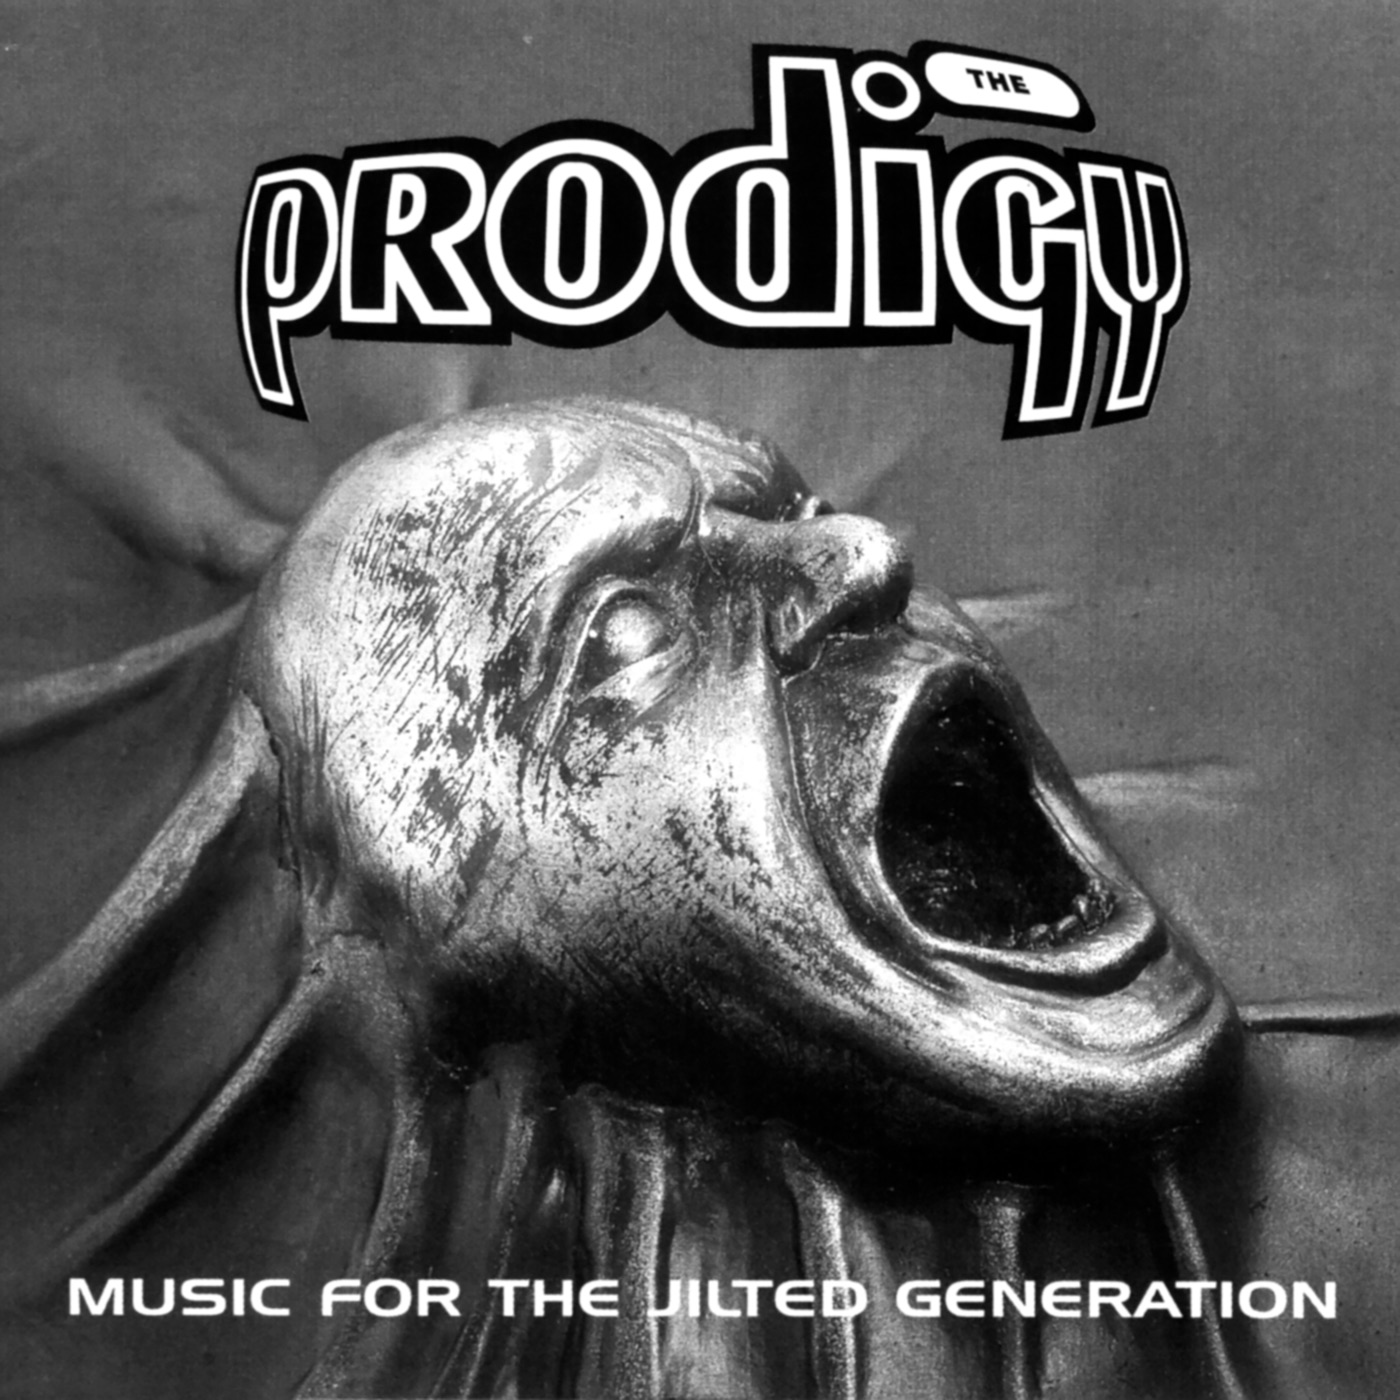 Music for the Jilted Generation by The Prodigy